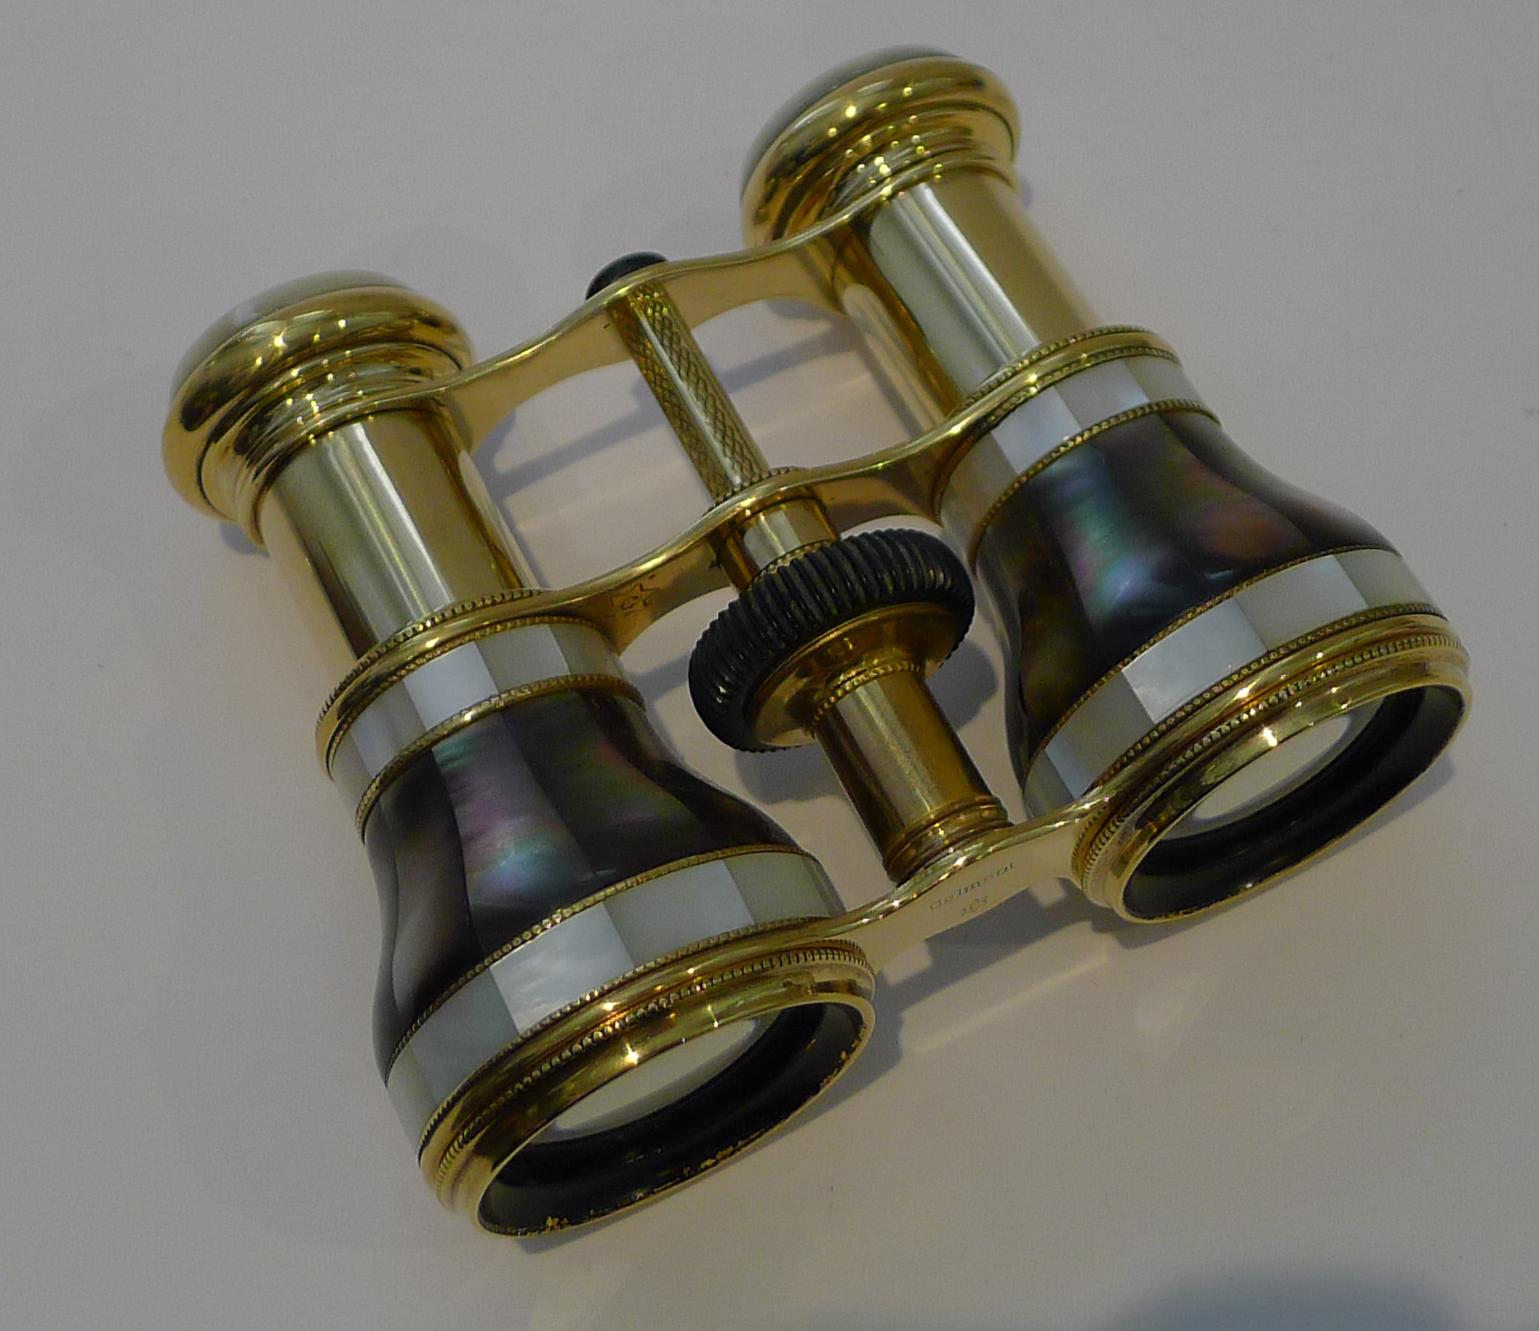 A stunning and rarely found pair of exceptional French Opera Glasses, beautifully made with lots of detail and the outstanding combination of Mother of Pearl and Abalone Shell.

They are beautifully signed on the underside for the top notch maker,